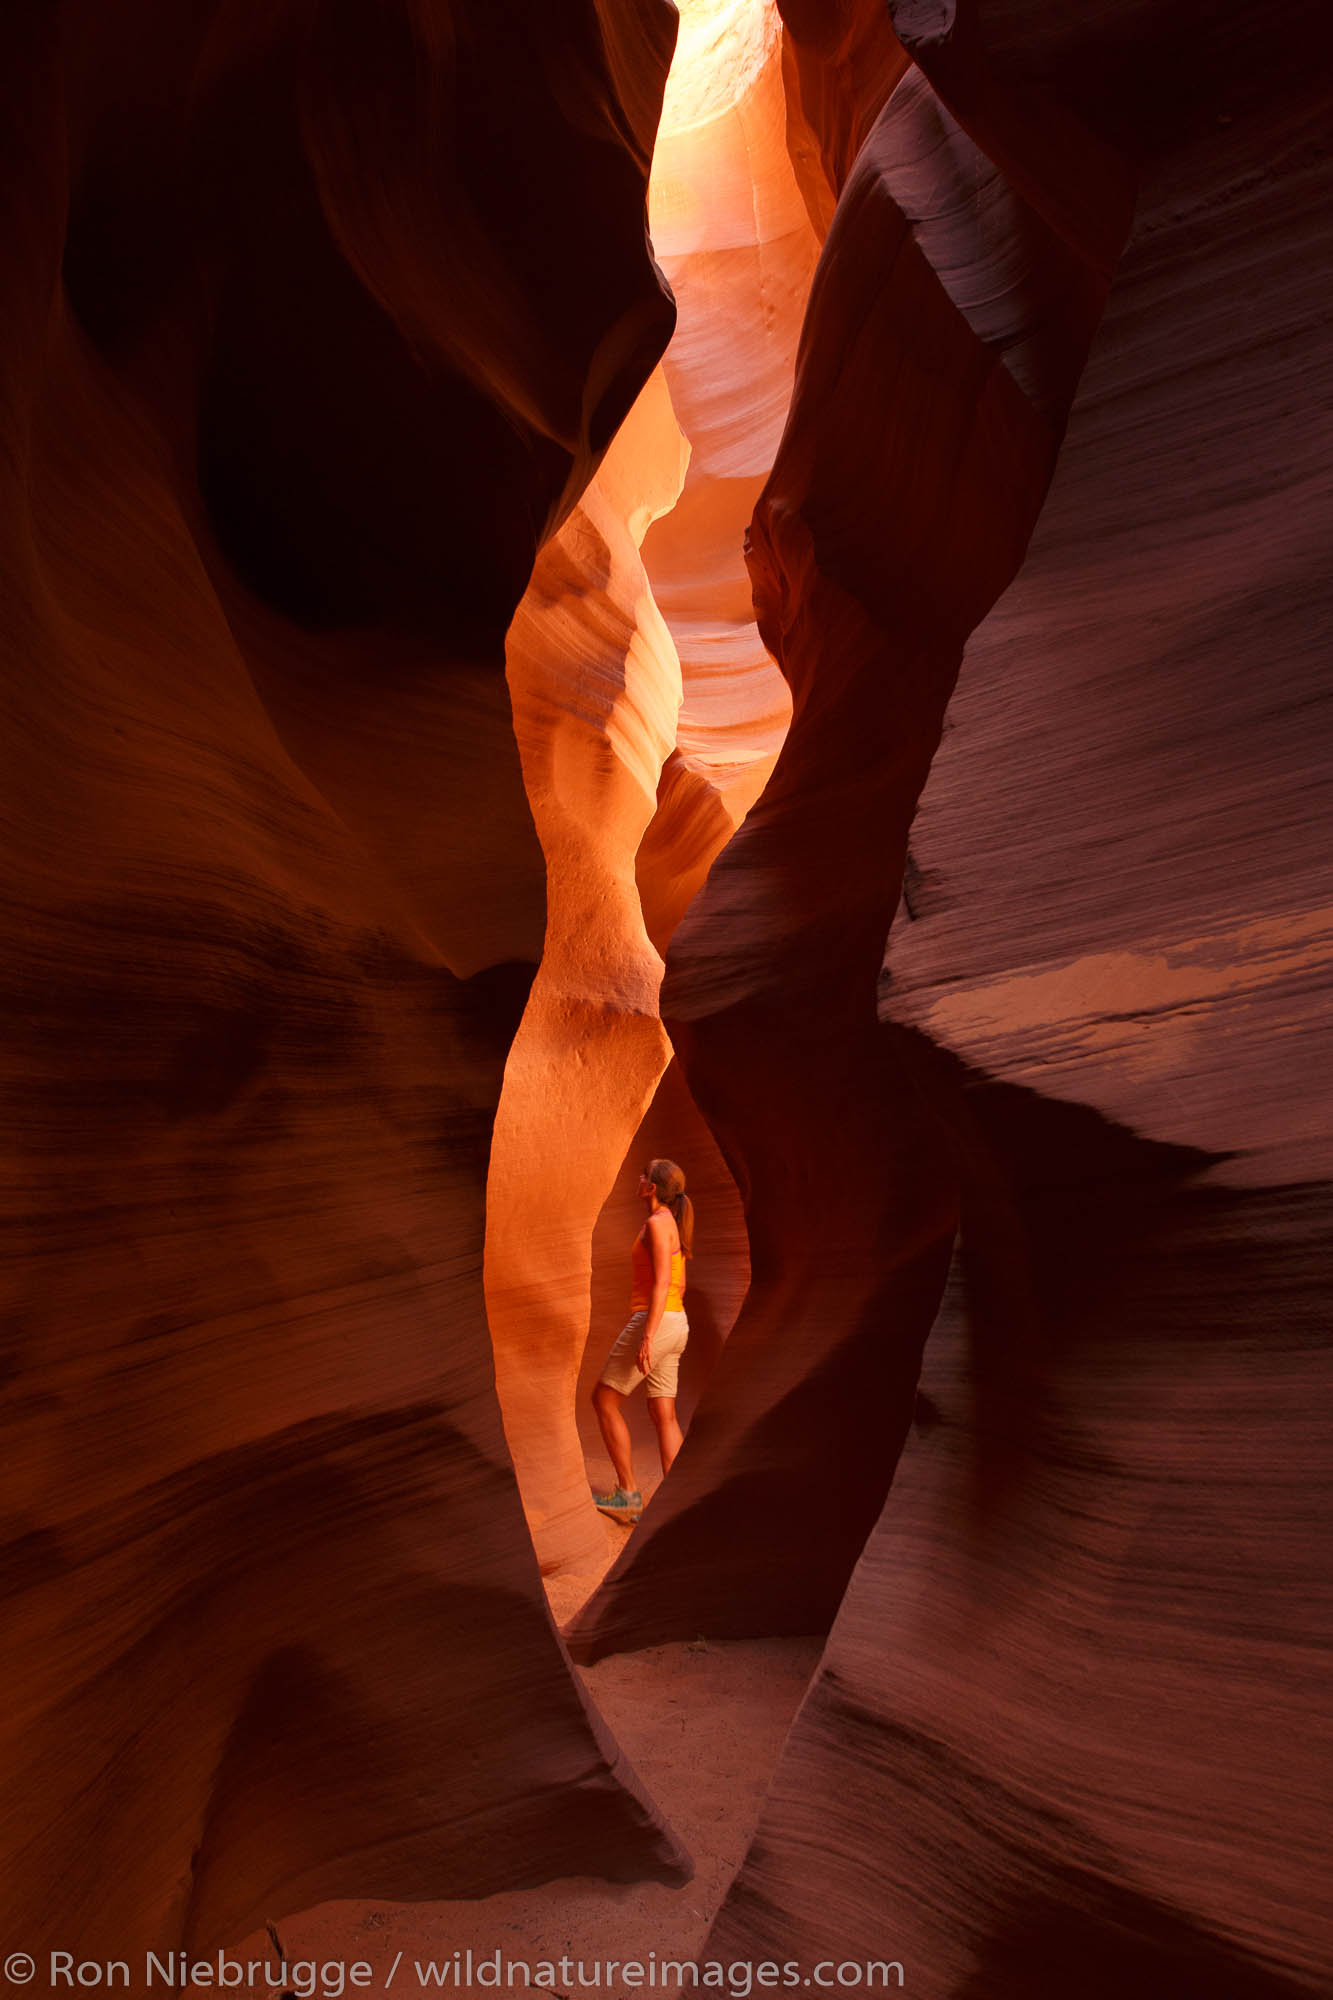 A visitor in the slot canyon known as Secret Canyon on Navajo land, Page, Arizona.  (model released)